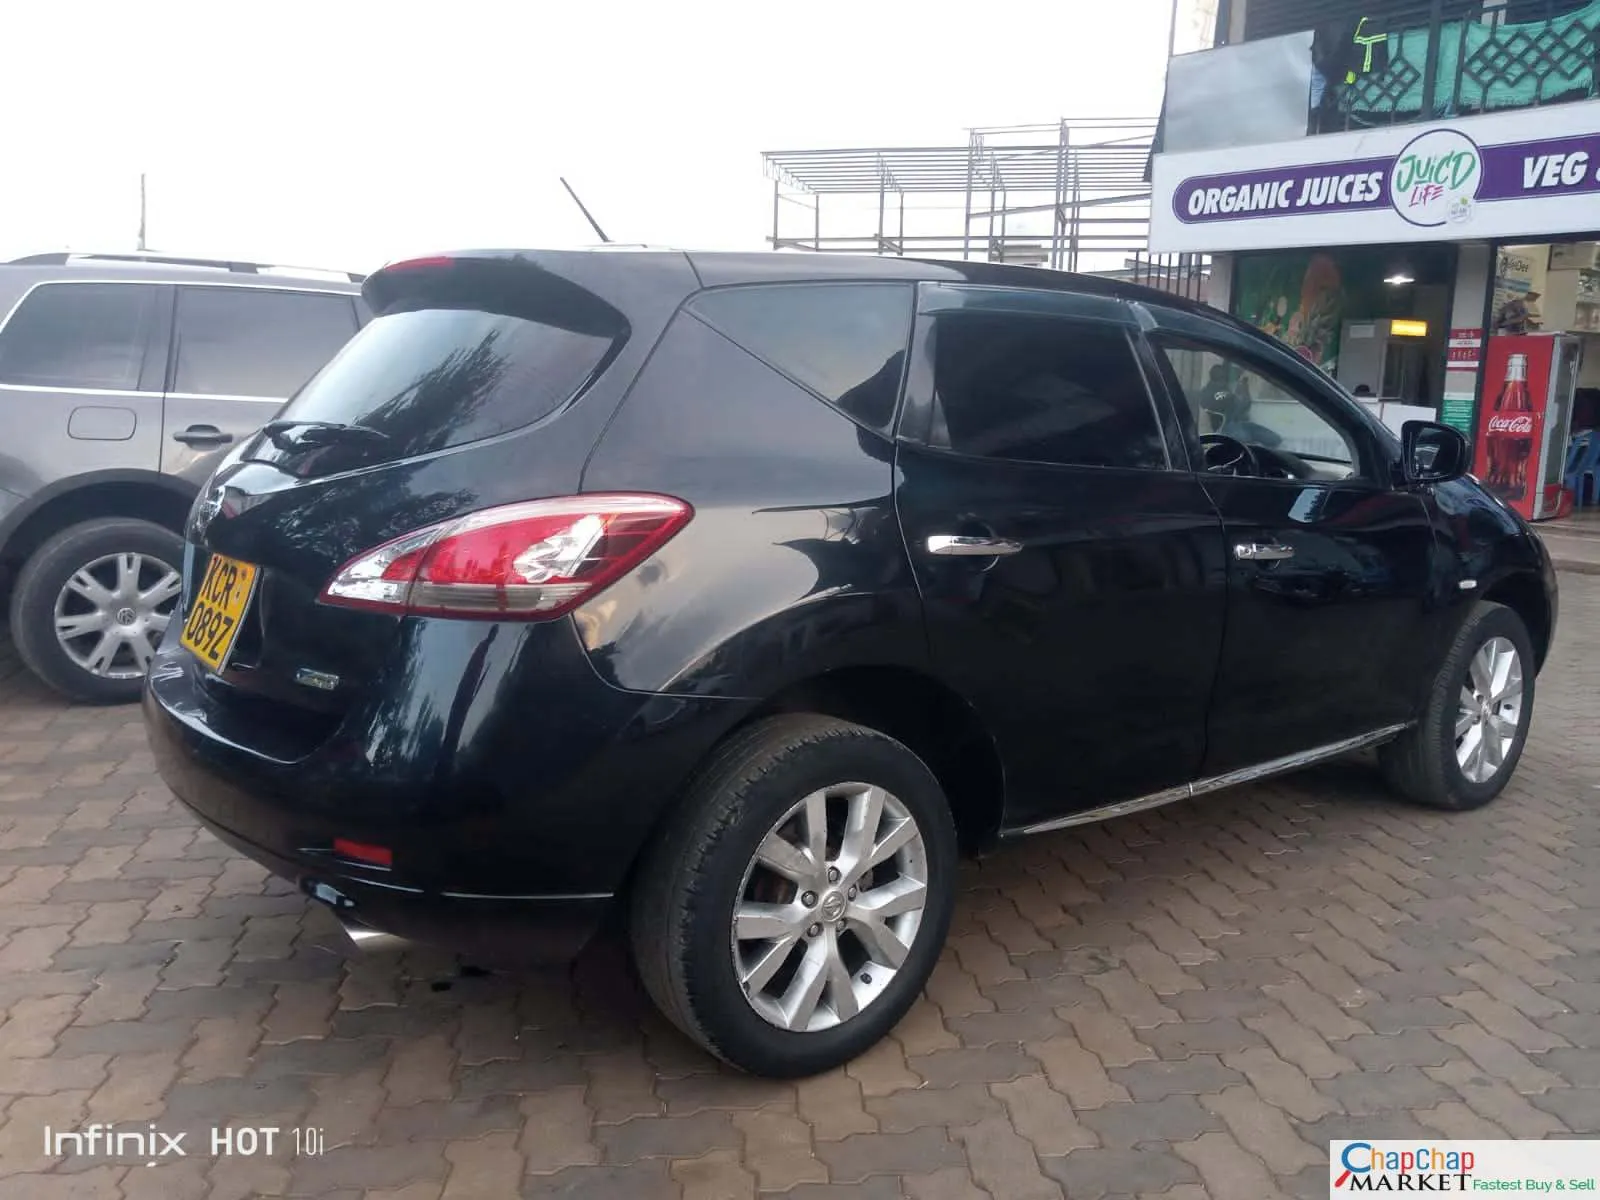 Cars Cars For Sale-Nissan Murano QUICK SALE You ONLY Pay 30% Deposit Trade in Ok EXCLUSIVE HIRE PURCHASE INSTALLMENTS 7